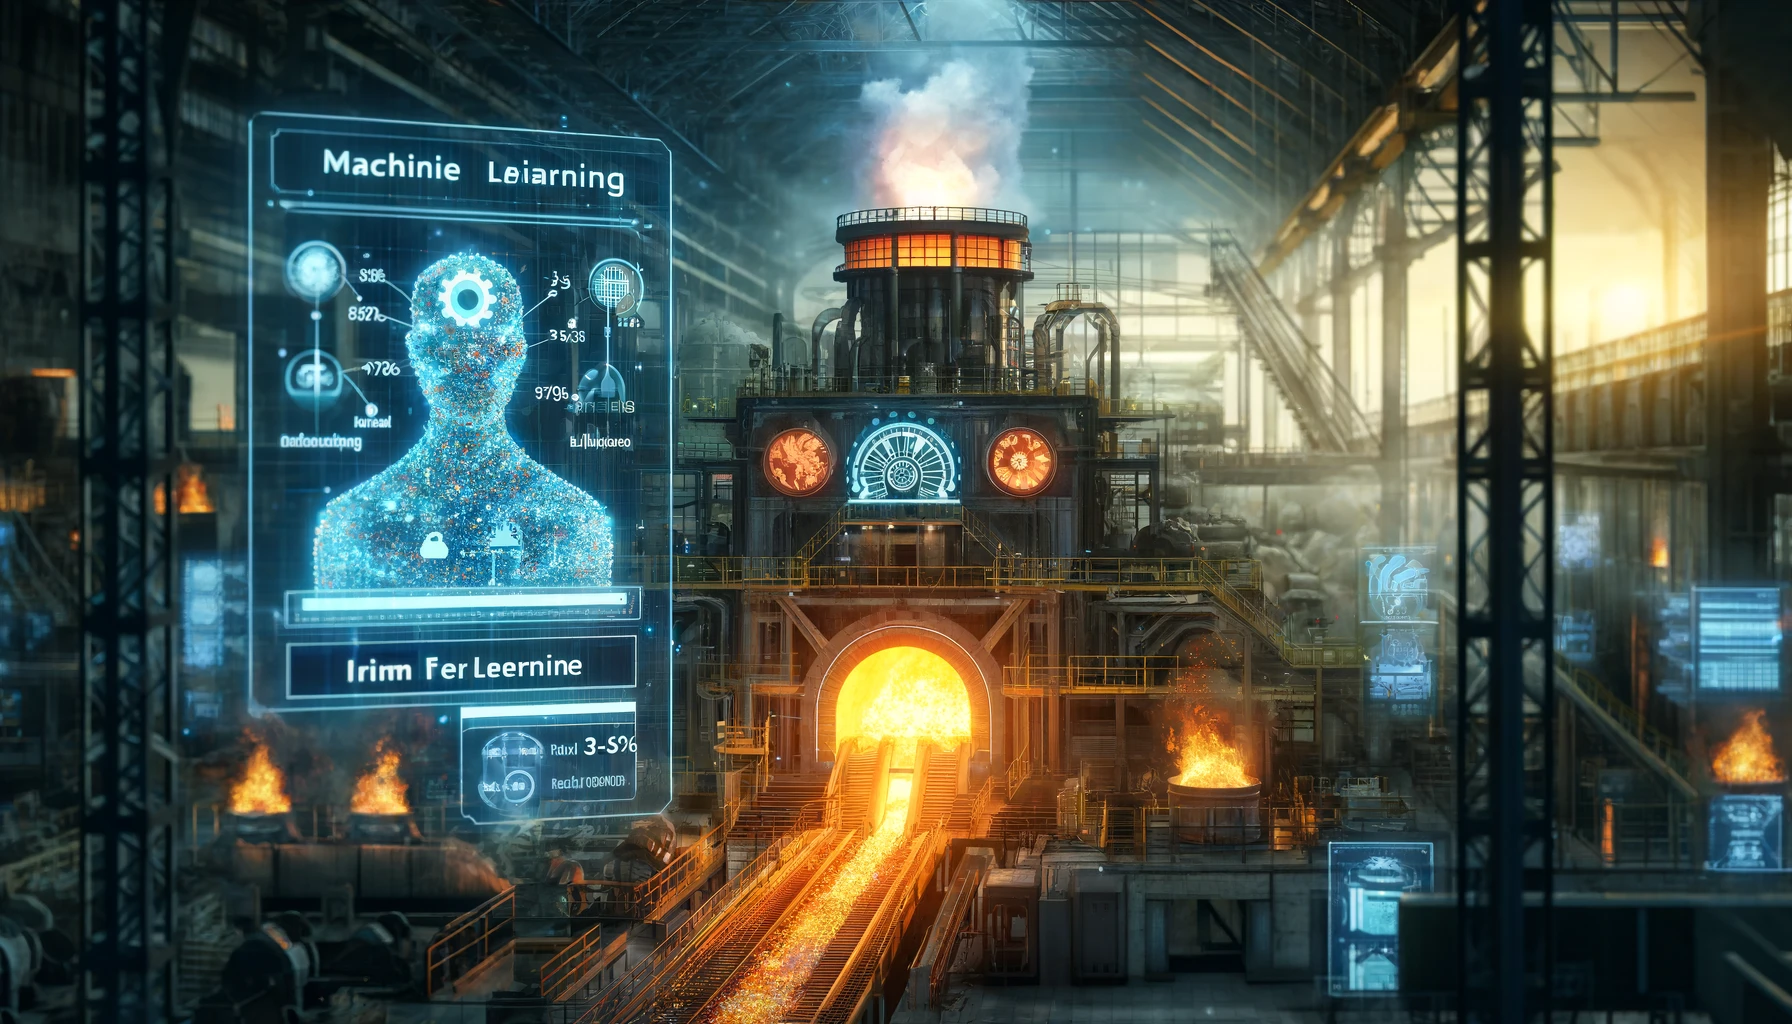 The illustration for the article about the machine learning solution reducing ferroalloys consumption in smelting is ready, highlighting the integration of advanced AI with traditional industrial processes.